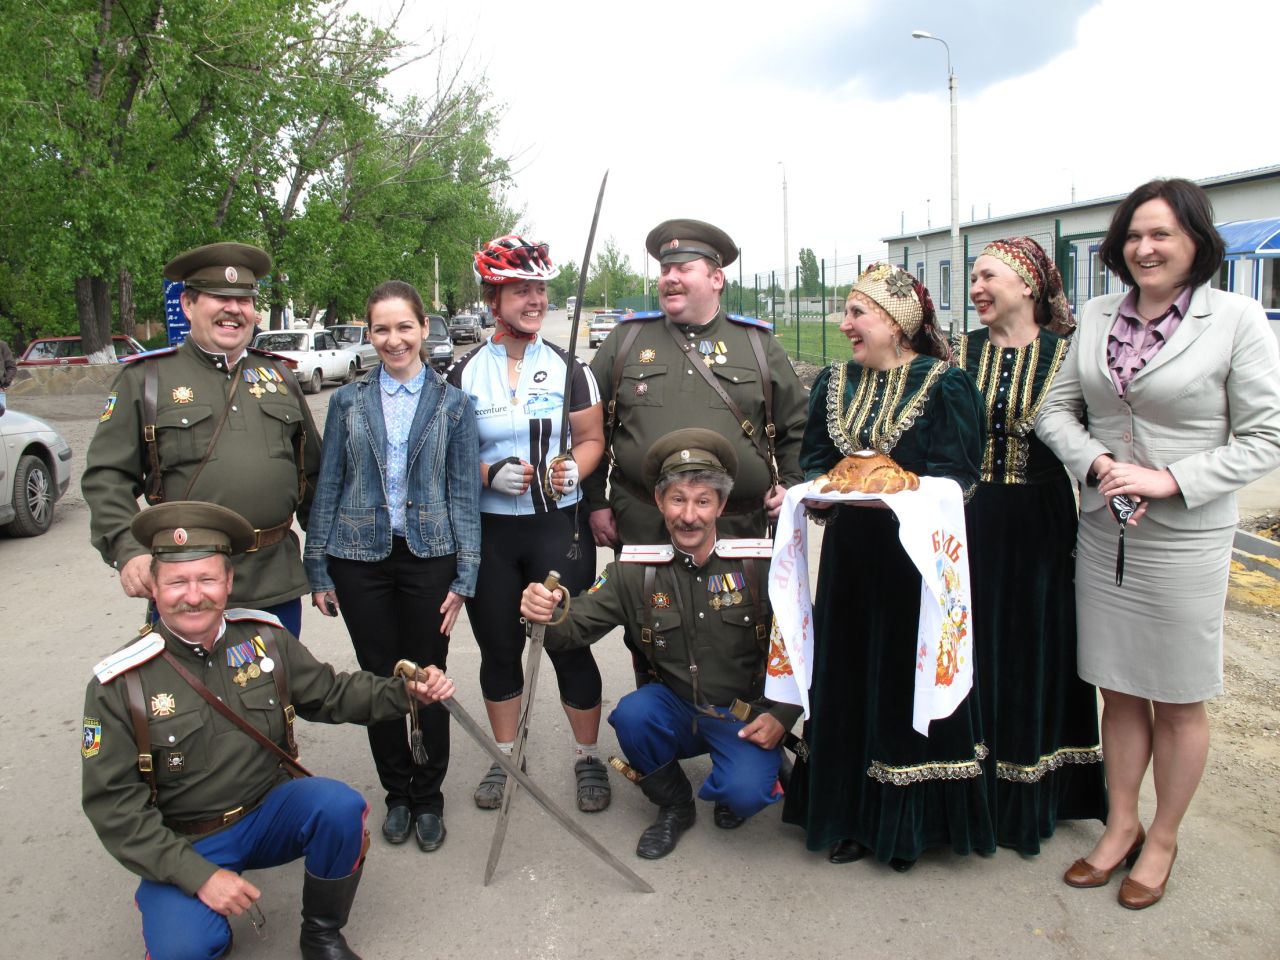 Receiveing a warm Kossack welcome as she crosses the border into Russia on May 16, 2011.